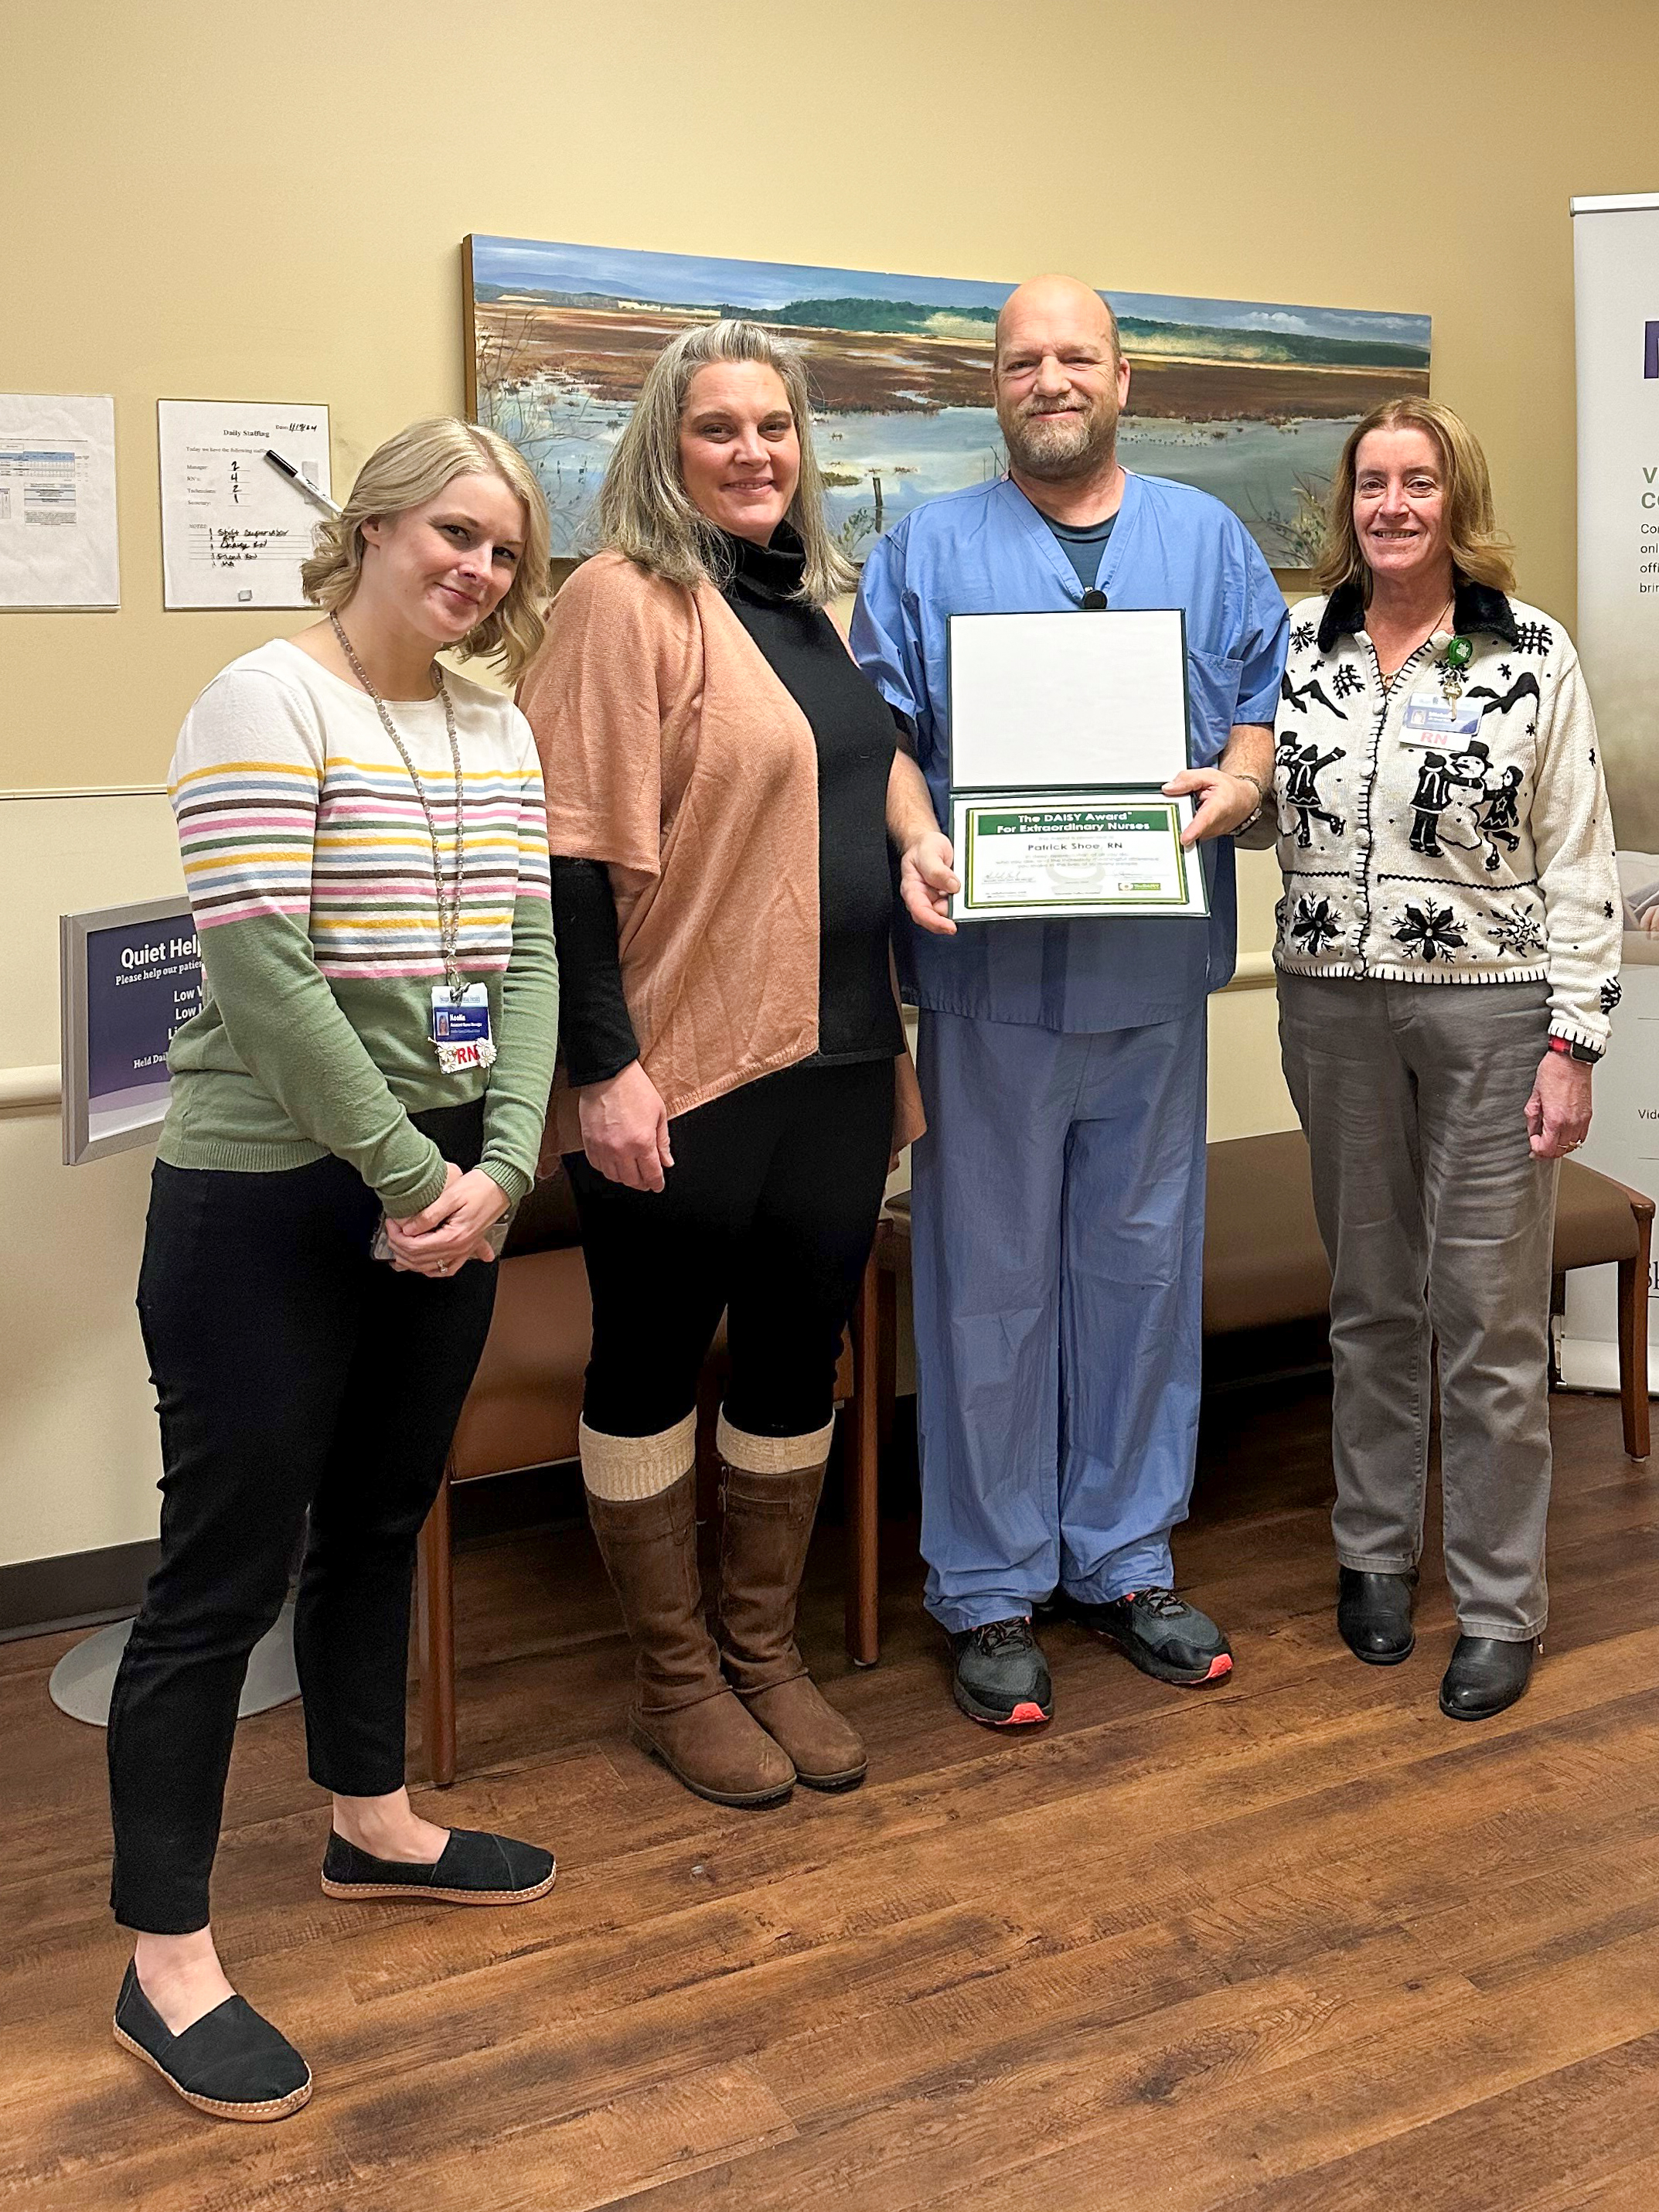 Four Cascade Valley Hospital staff members stand together, one male in scrubs holds the DAISY Award certificate.